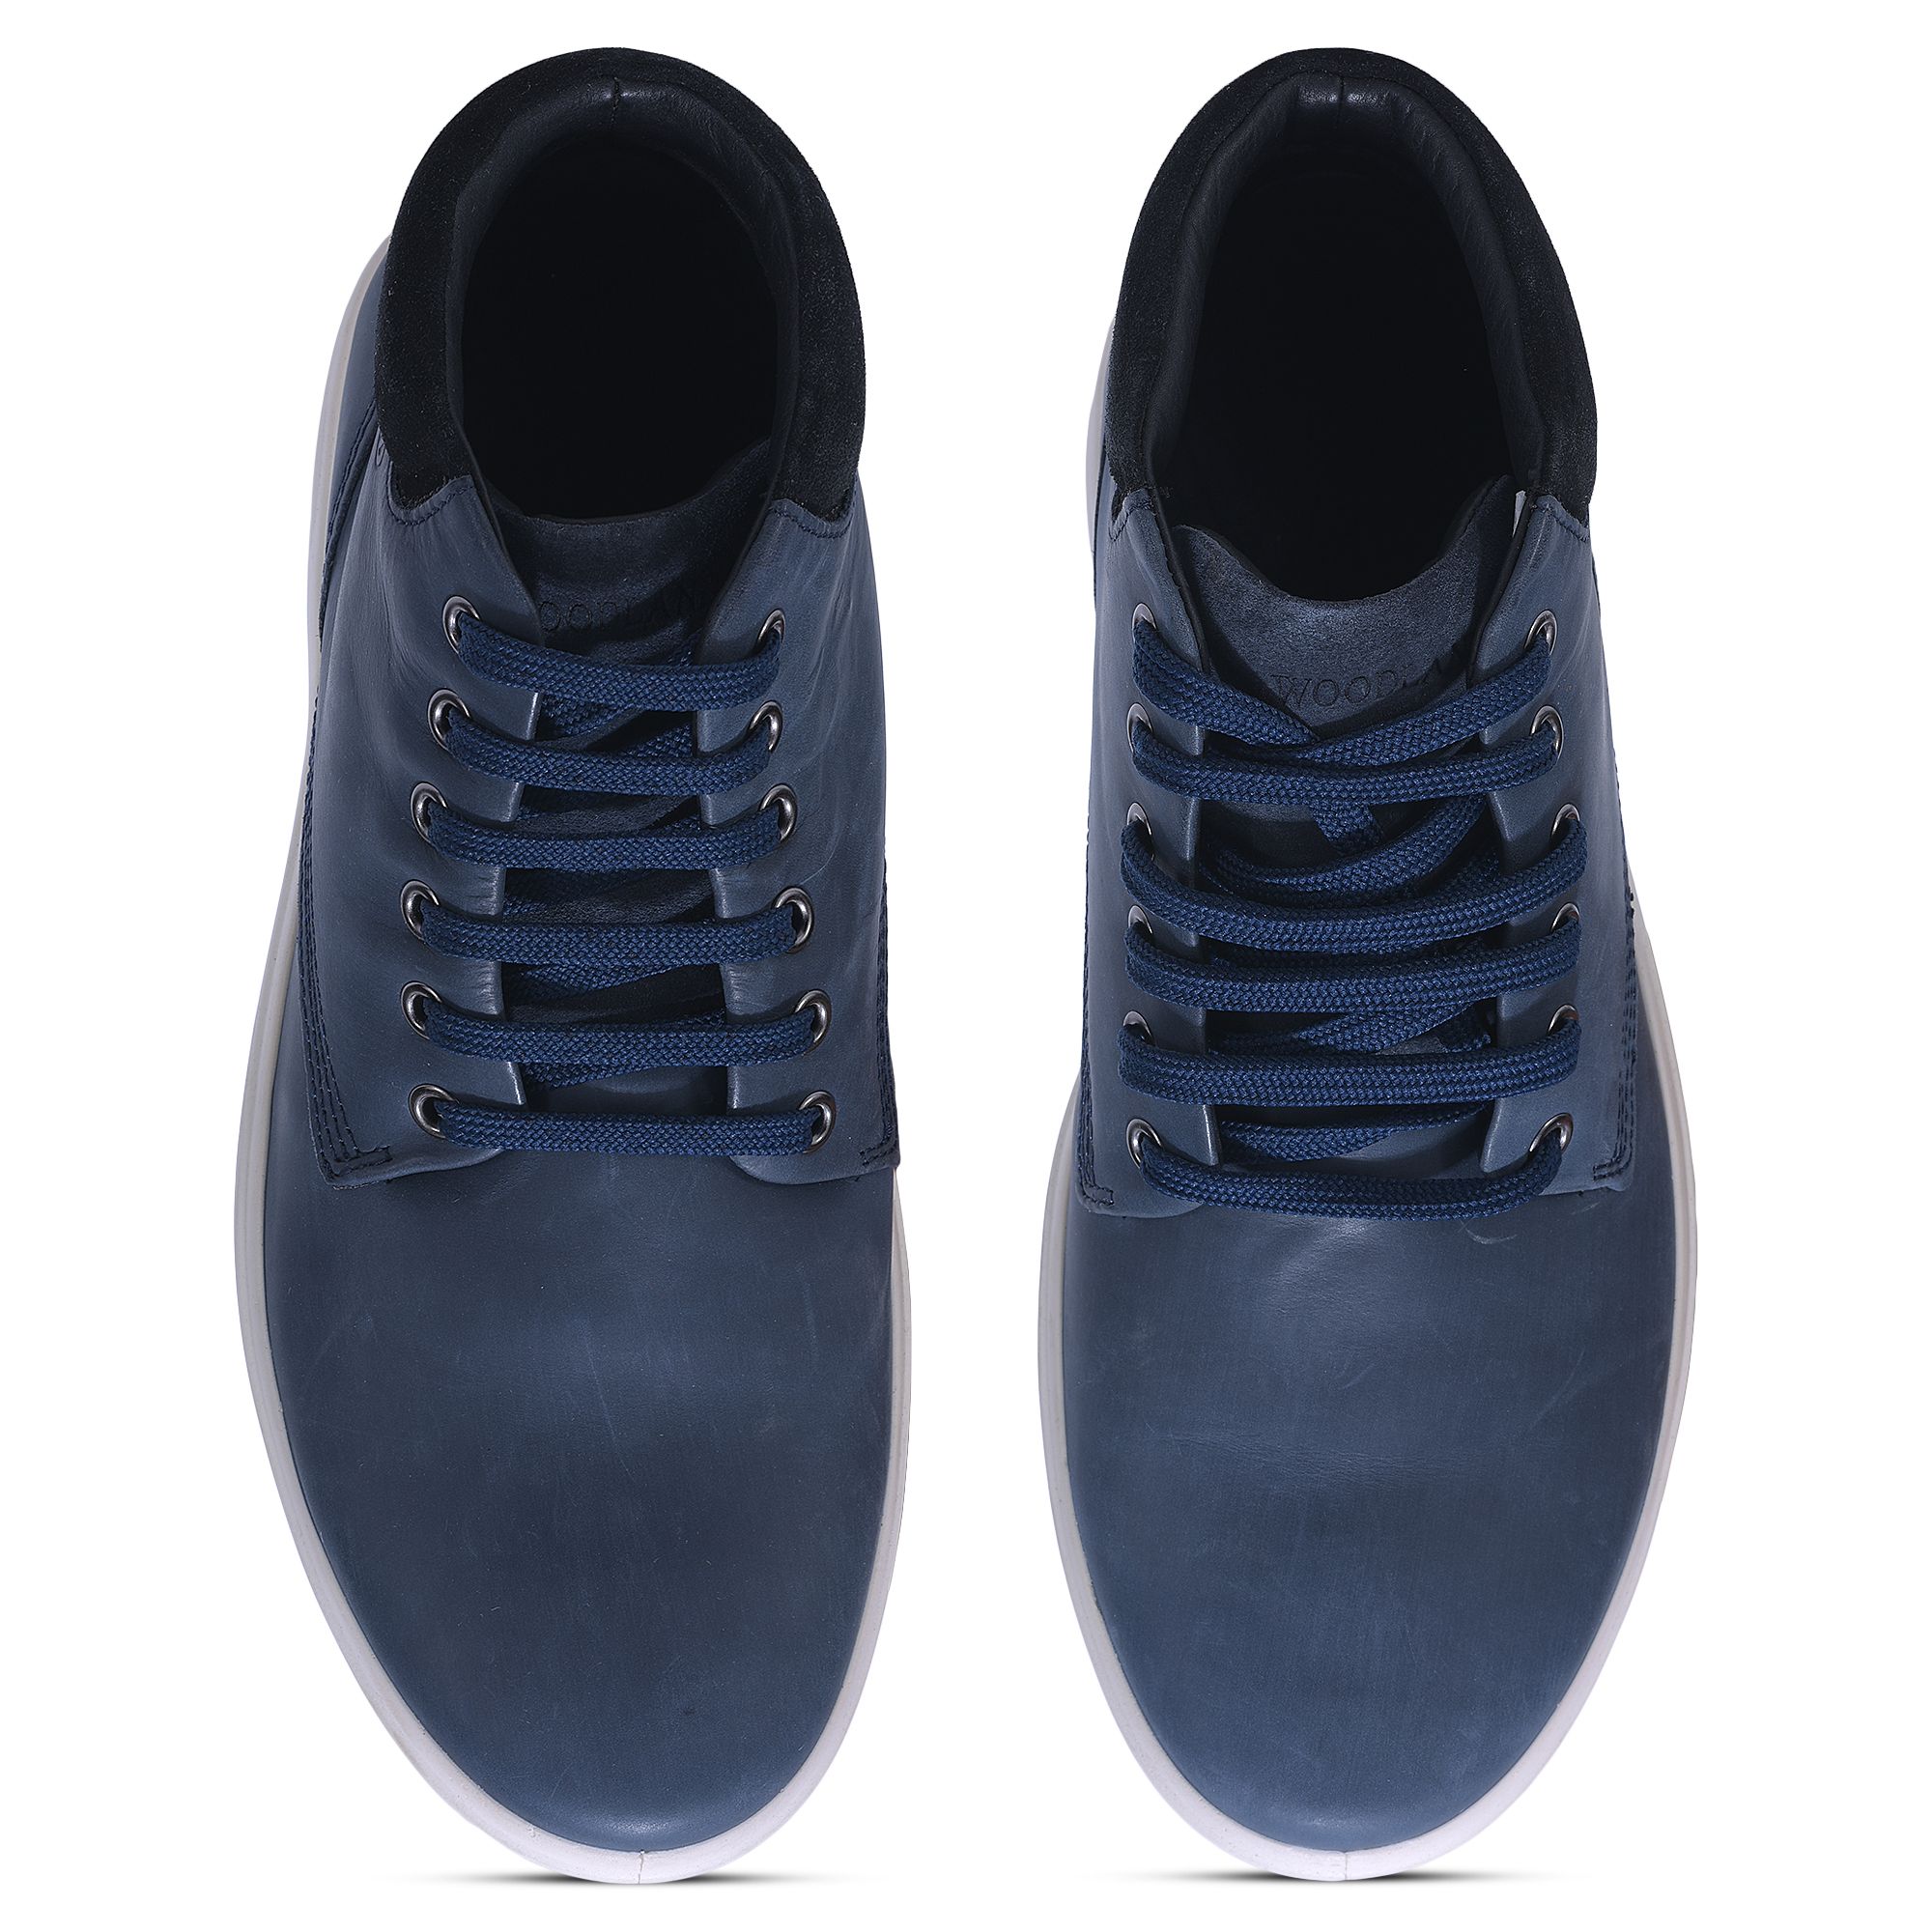 Woodland DBLUE casual sneakers